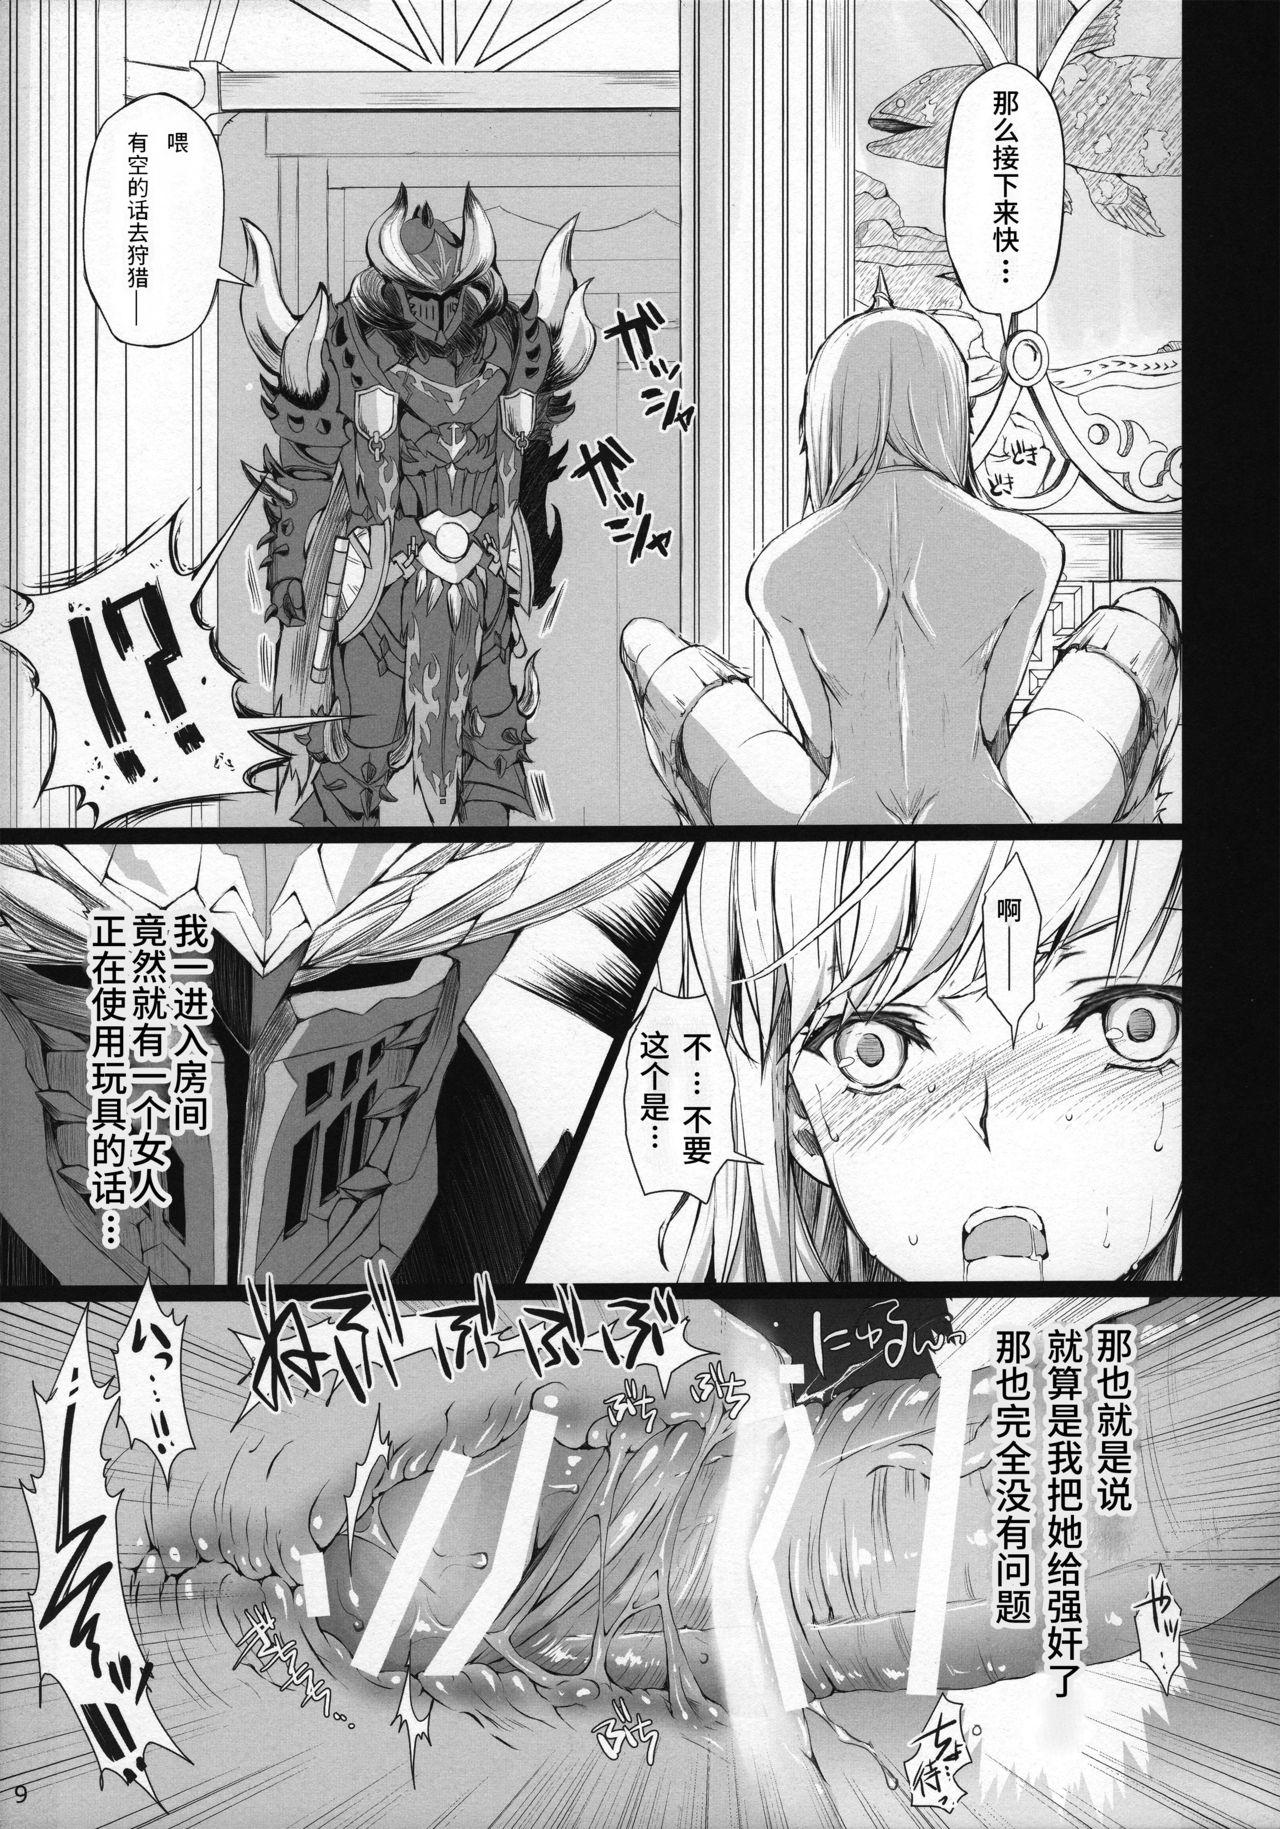 Cocksucking Udonko 18 - Monster hunter Culote - Page 8